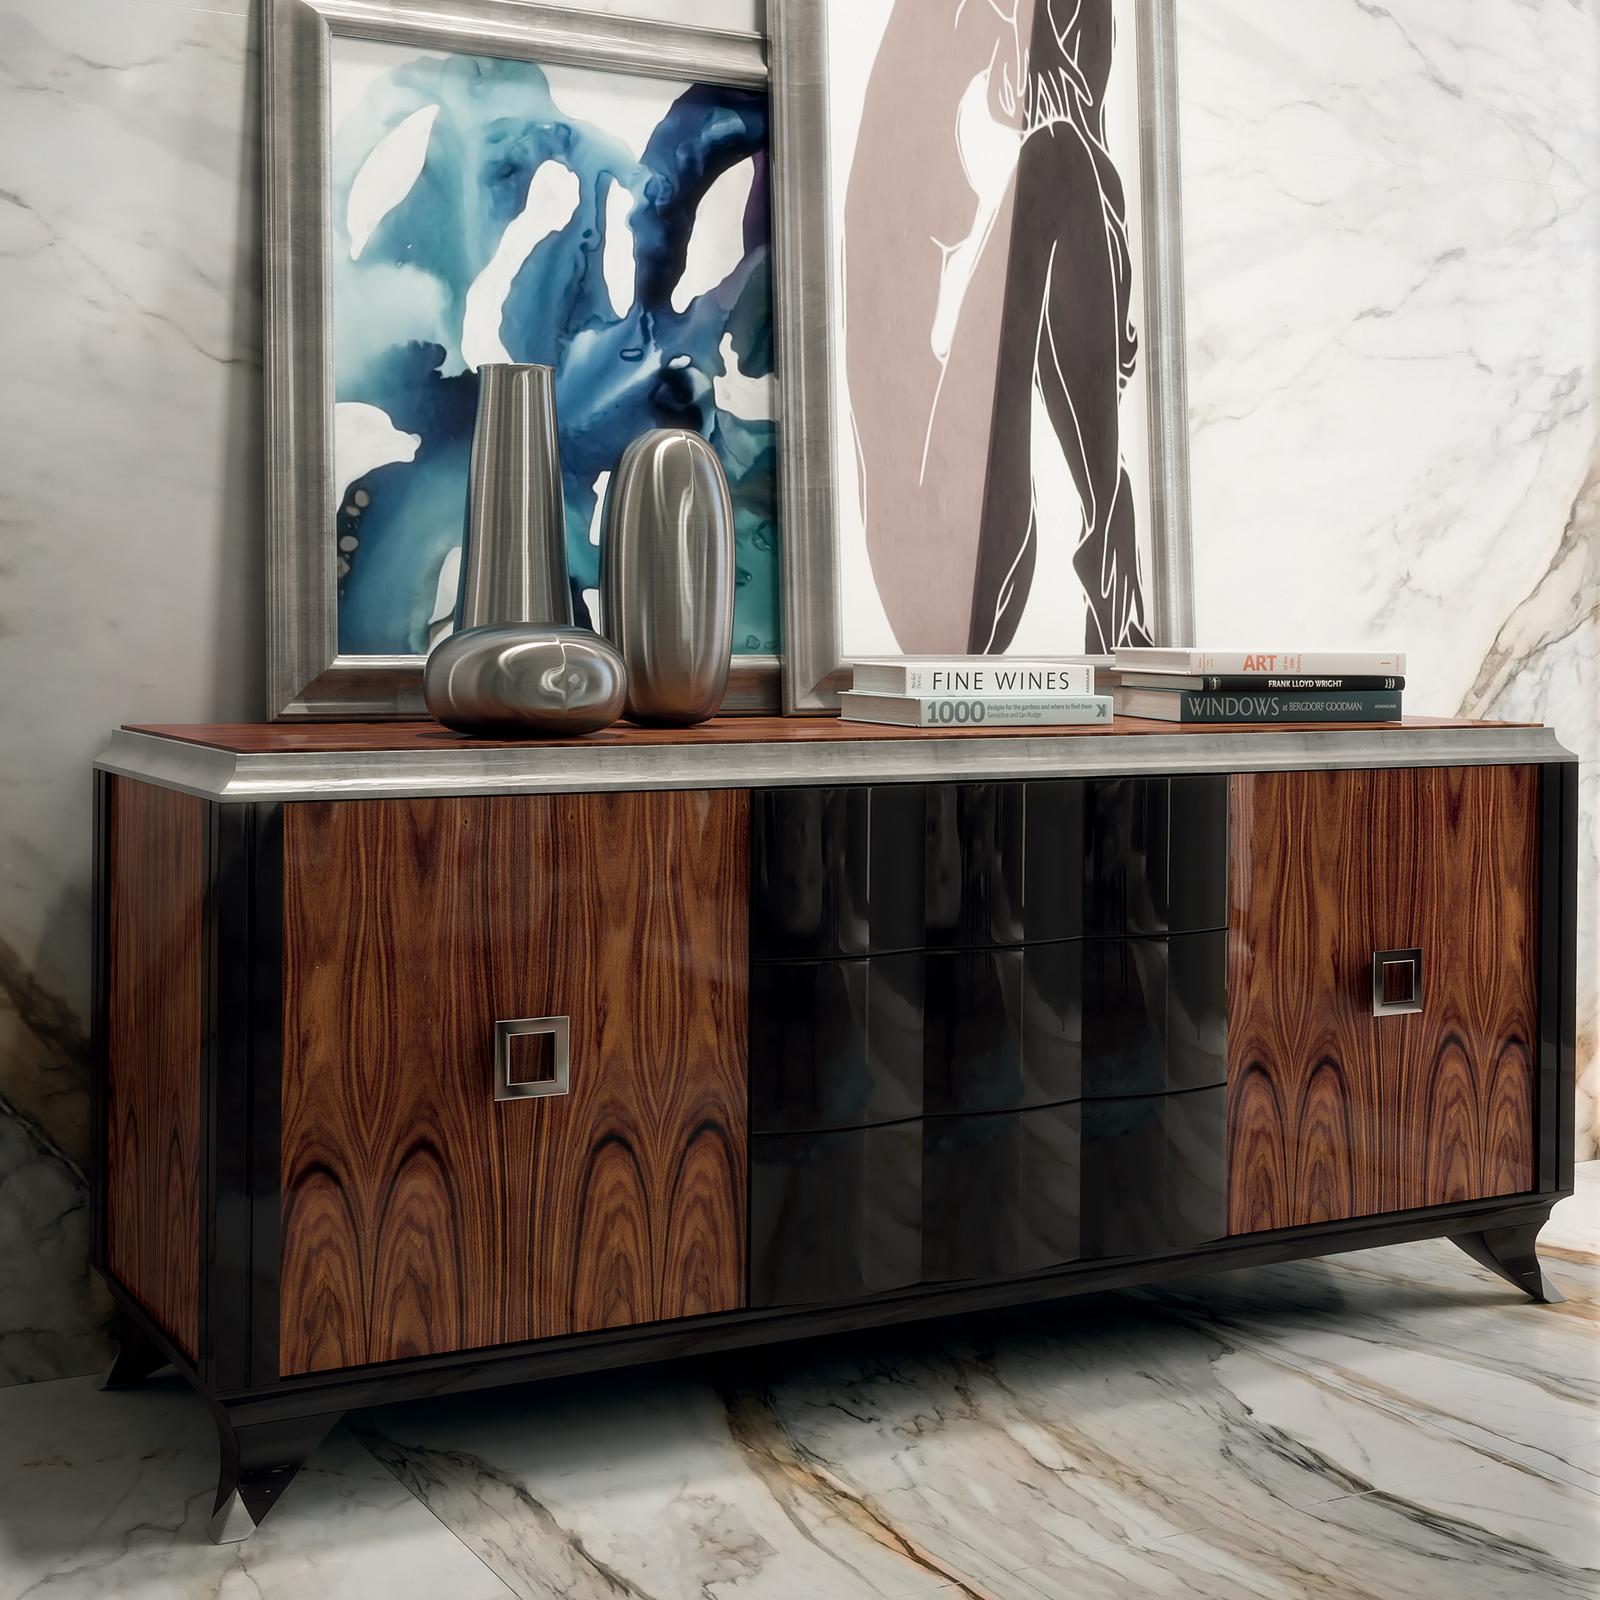 Featuring 2 doors and 3 drawers with push-pull blumotion, this spectacular Sideboard expertly combines tradition with modernity. The attractive design of the new Oscar collection adapts to settings with an exquisitely contemporary and cosmopolitan